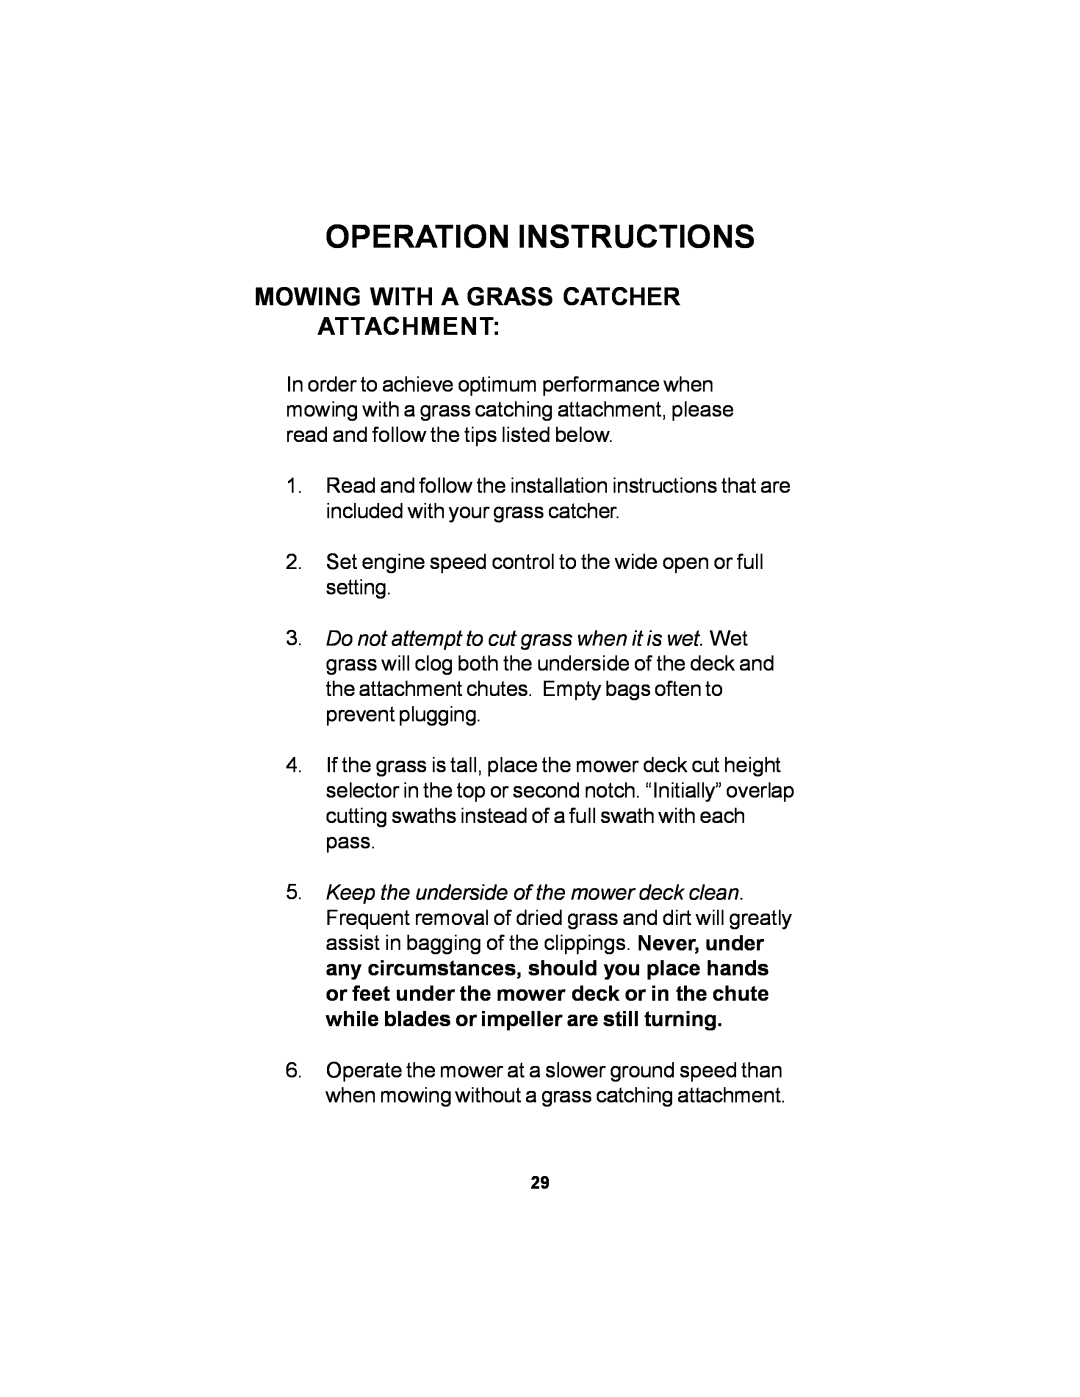 Dixon 11249-106 manual Mowing With A Grass Catcher Attachment, Operation Instructions 